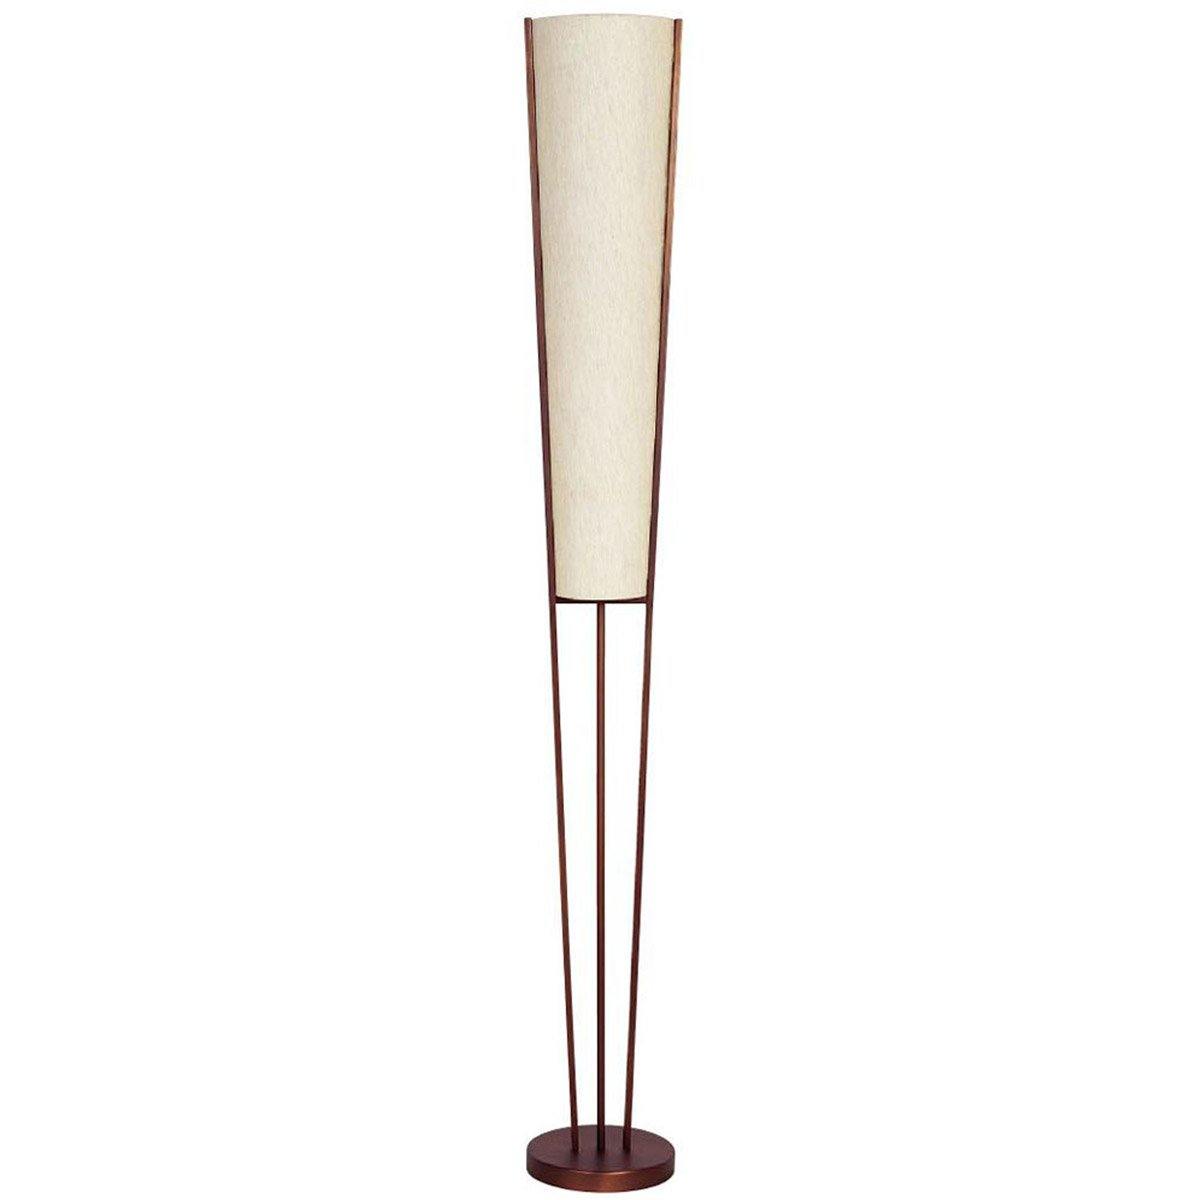 Steel with Fabric Shade Torch Style Floor Lamp - LV LIGHTING